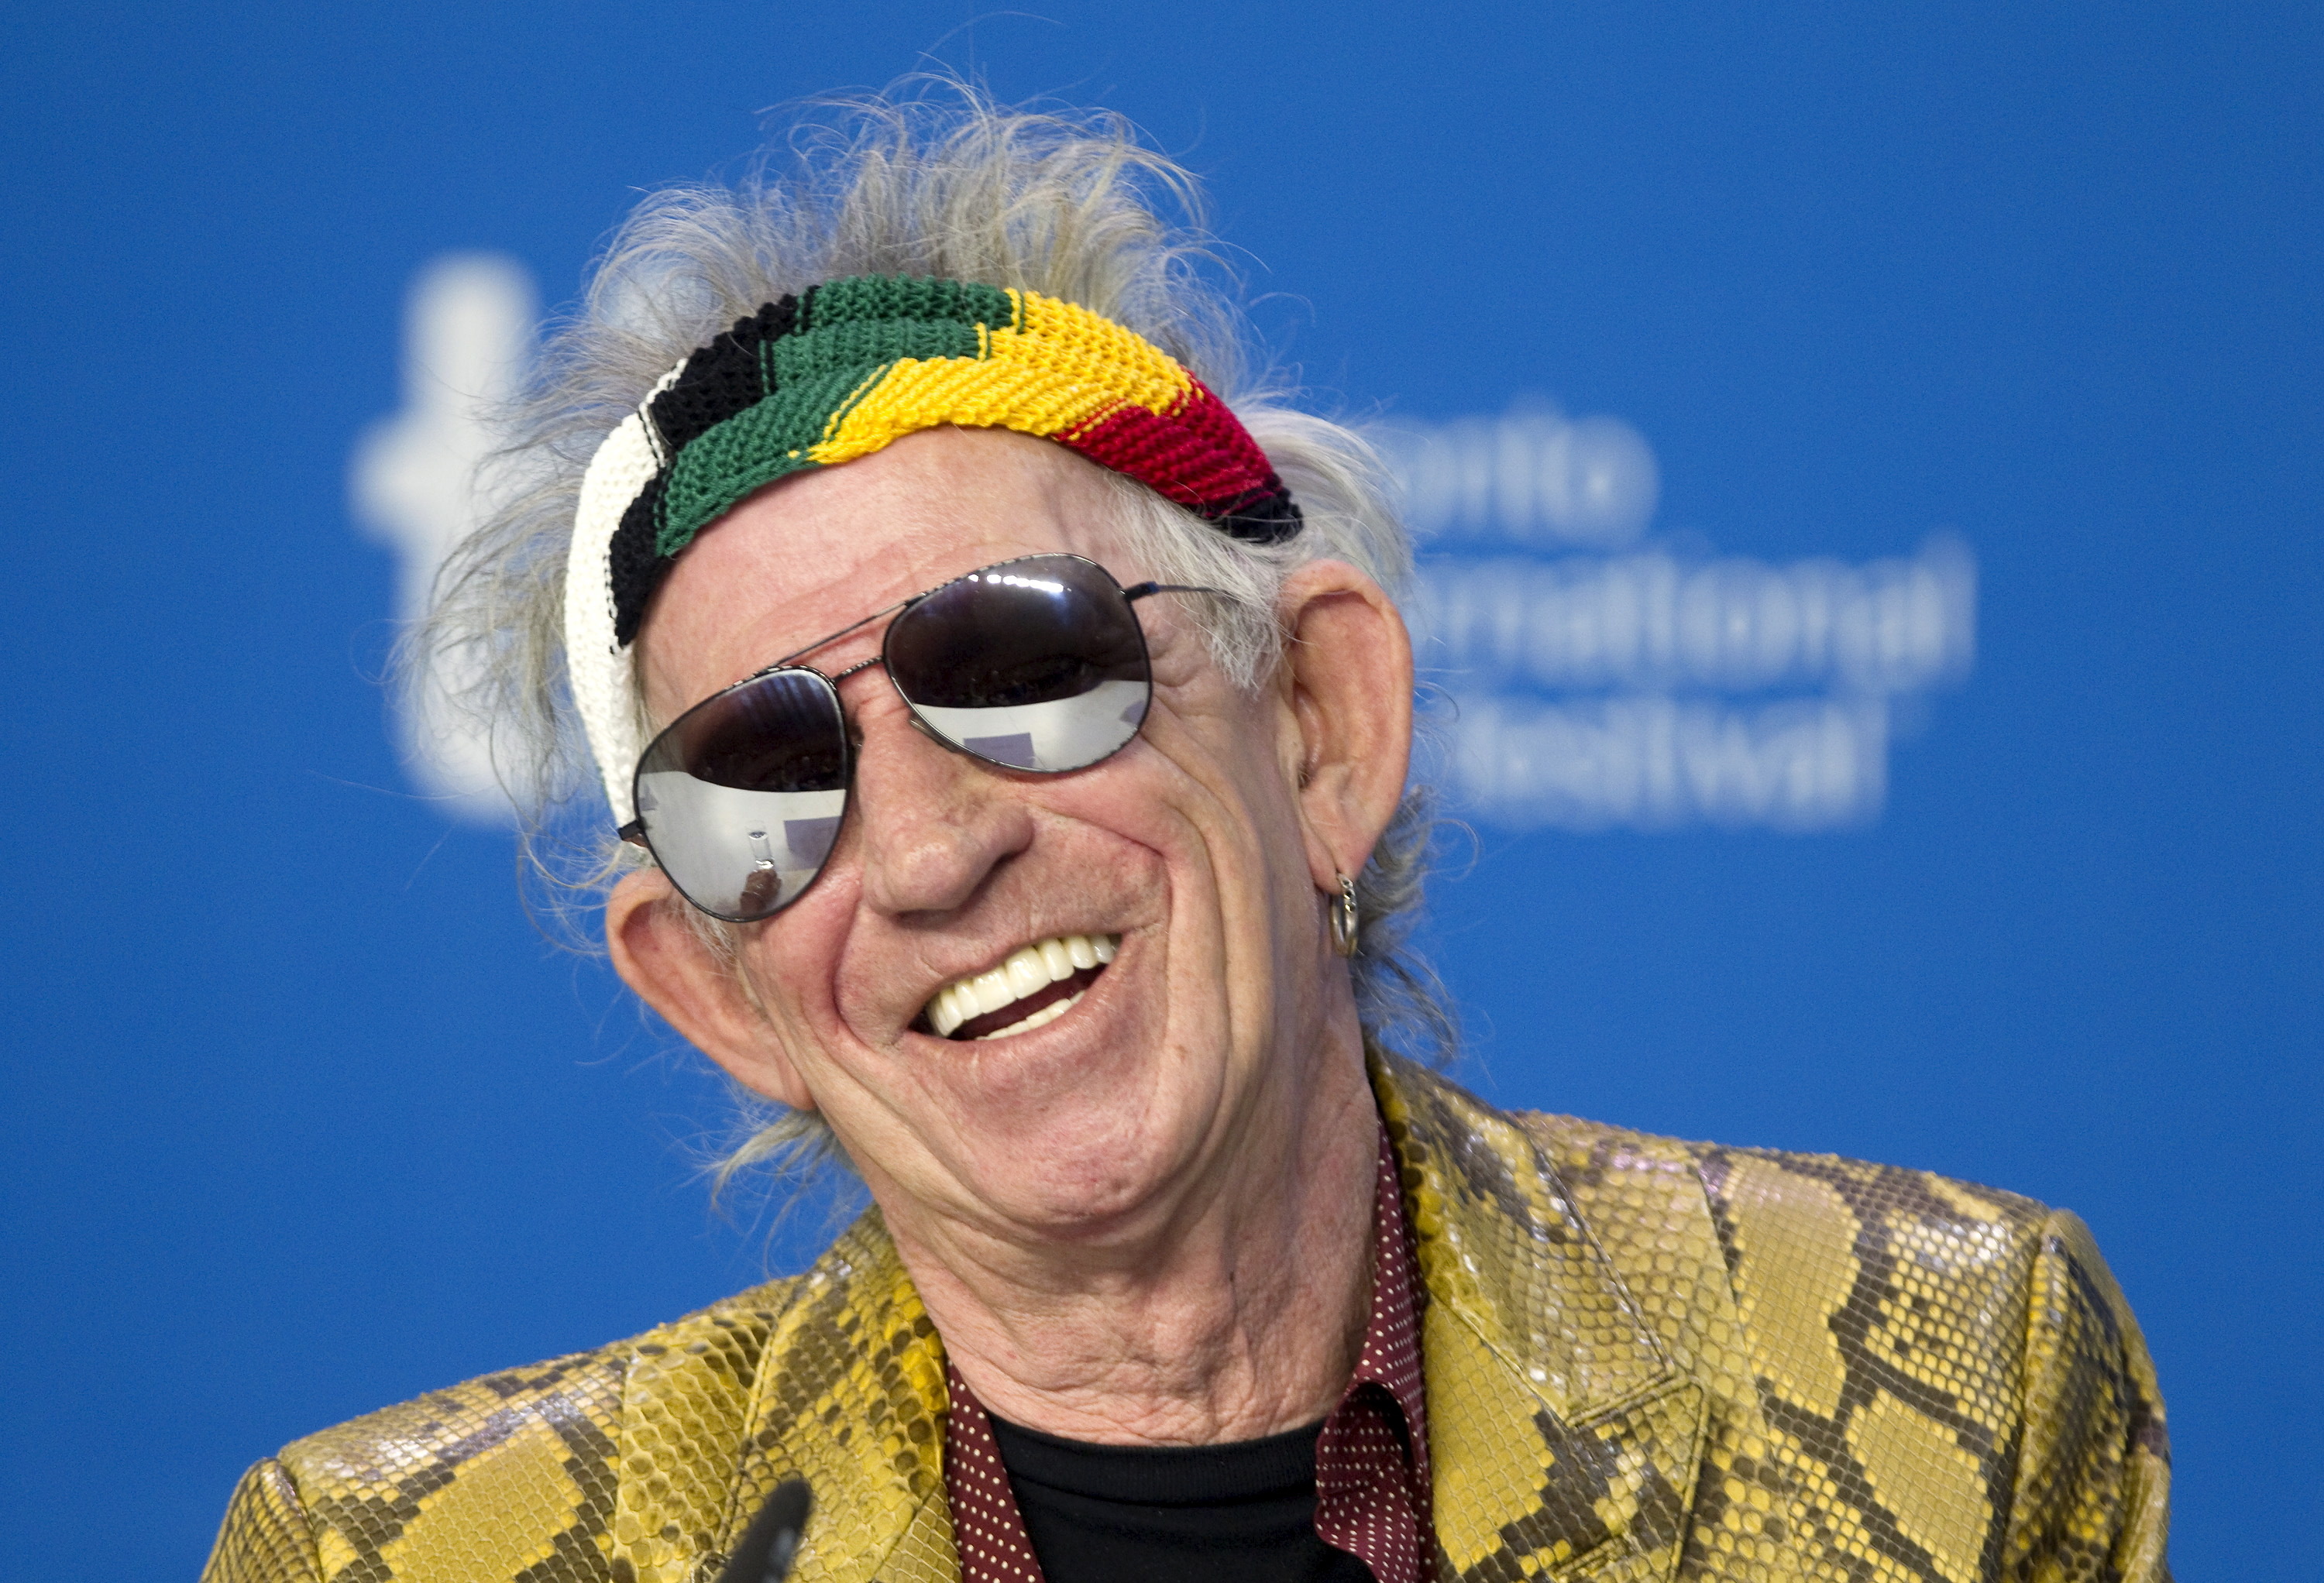 Keith Richards wallpapers, Music icon, High-resolution pictures, 2019 collection, 3000x2050 HD Desktop